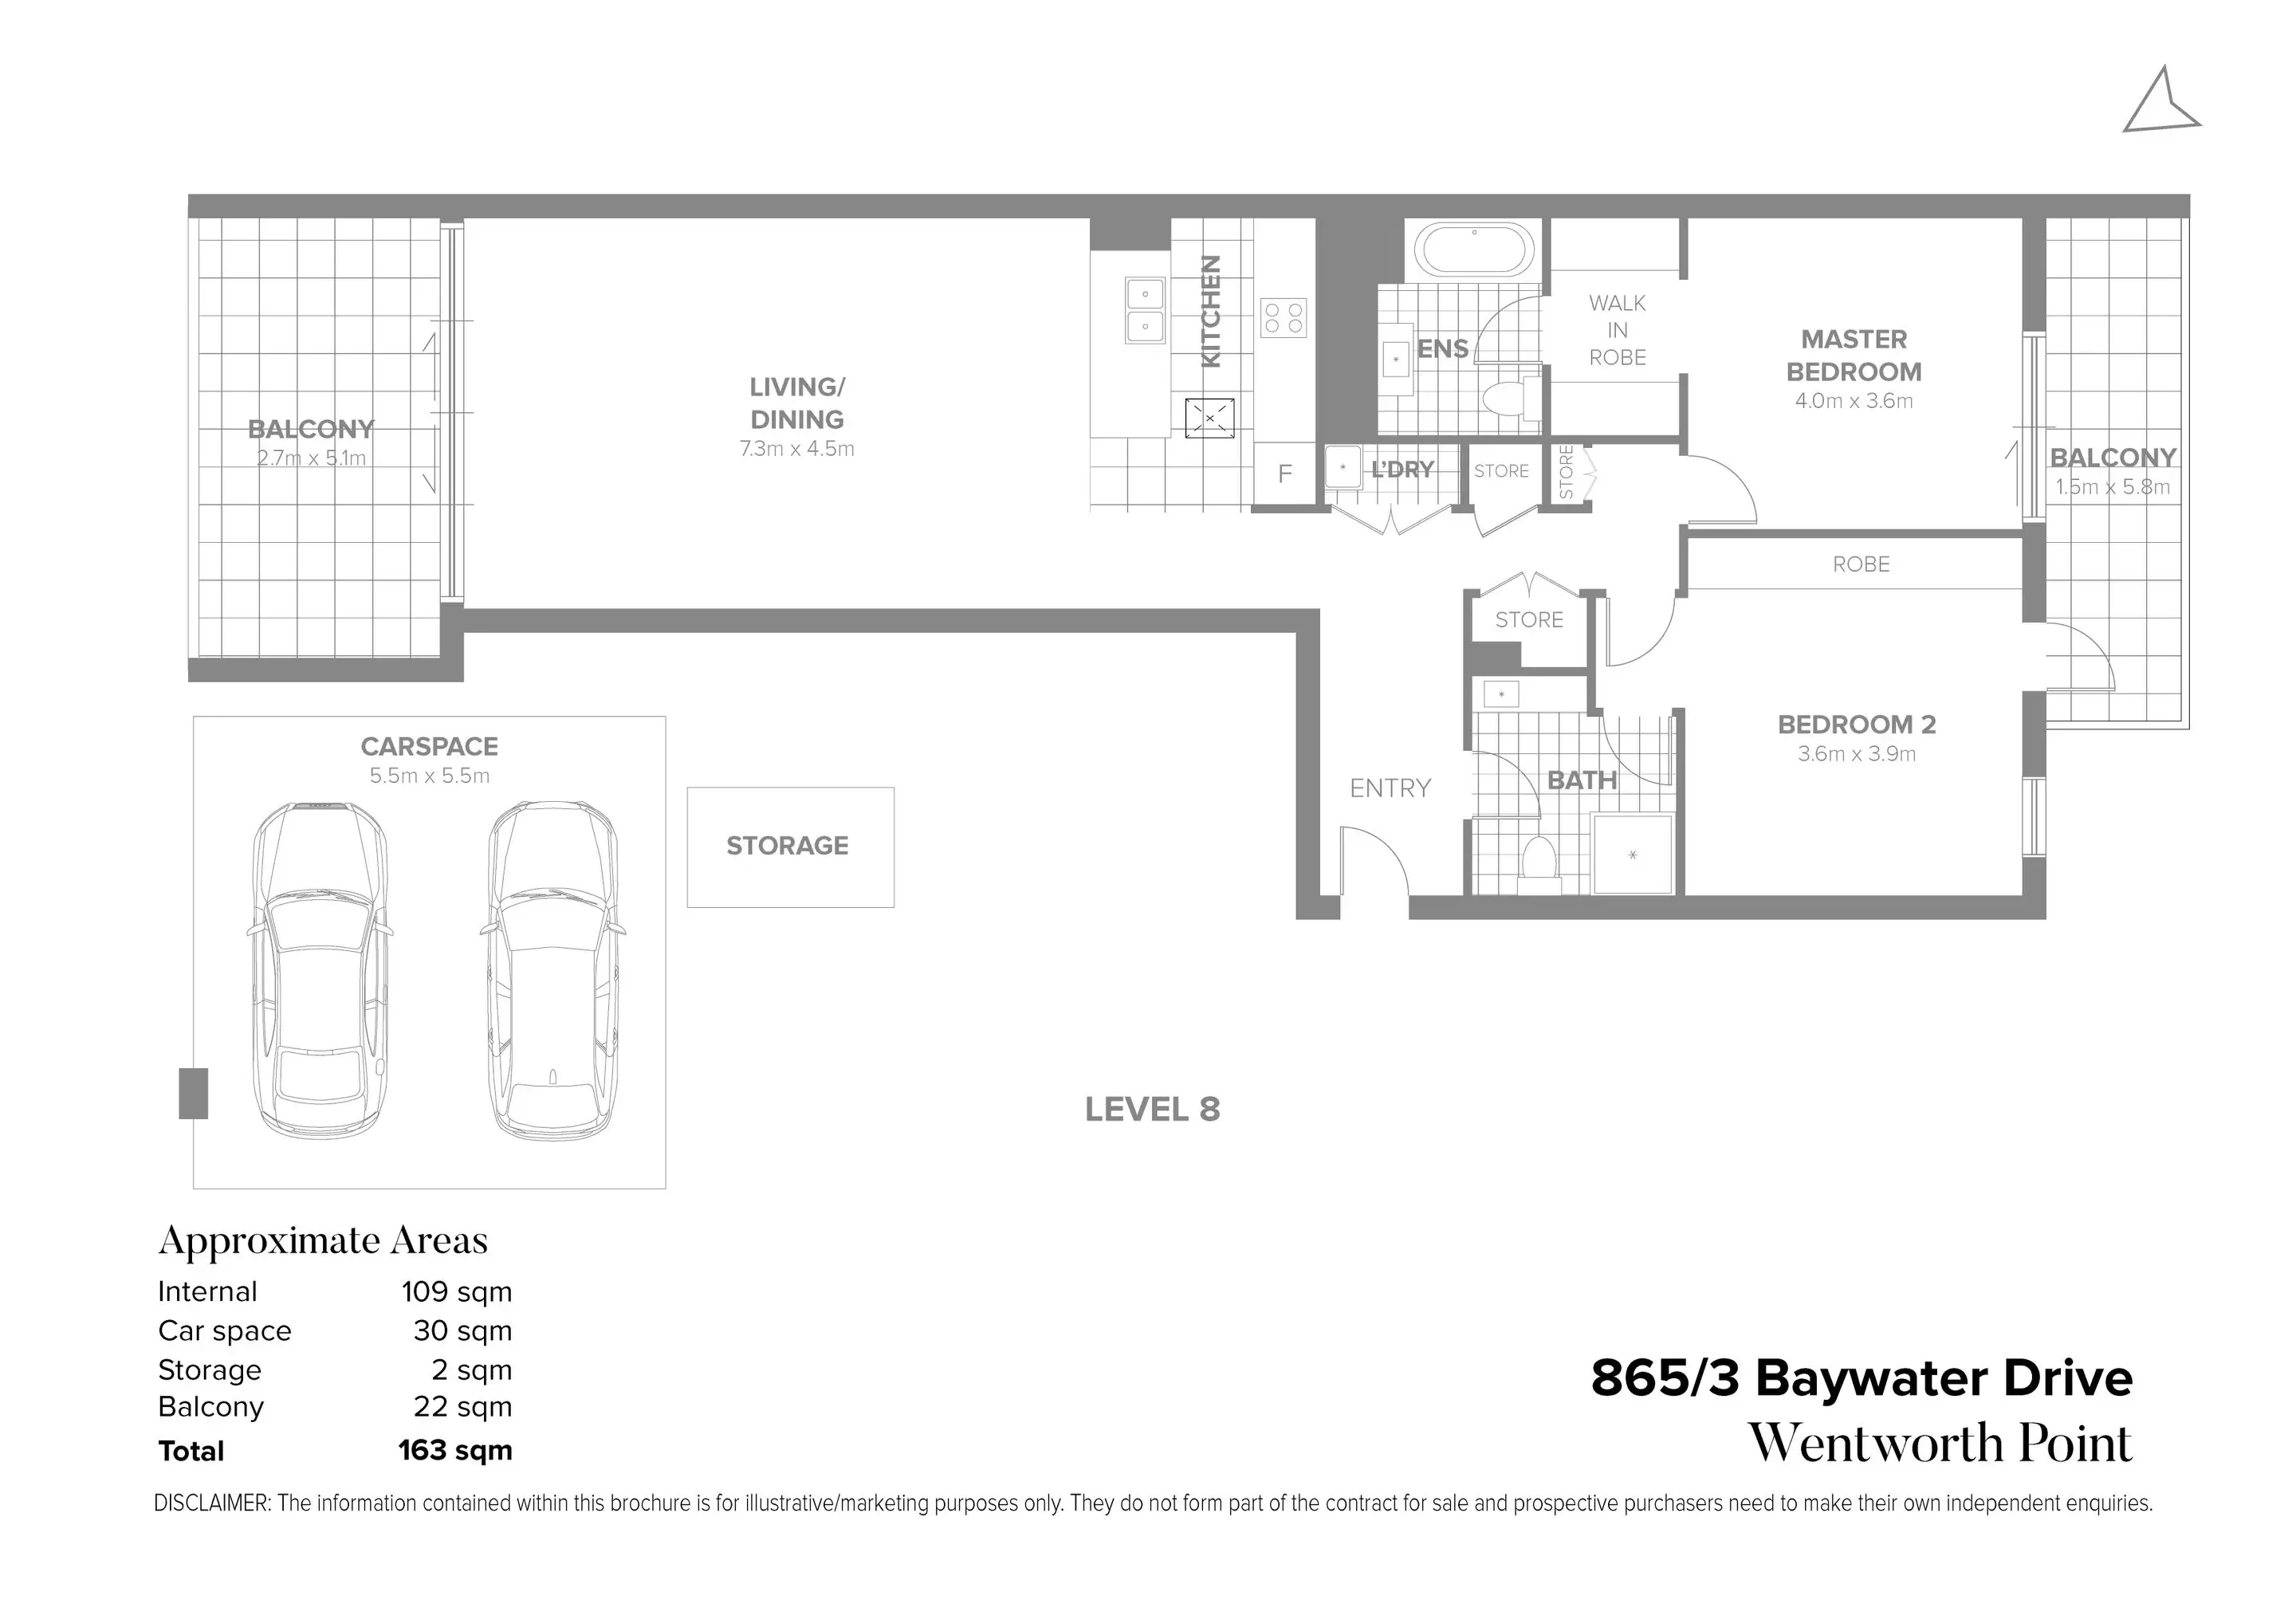 865/3 Baywater Drive, Wentworth Point Sold by Chidiac Realty - floorplan